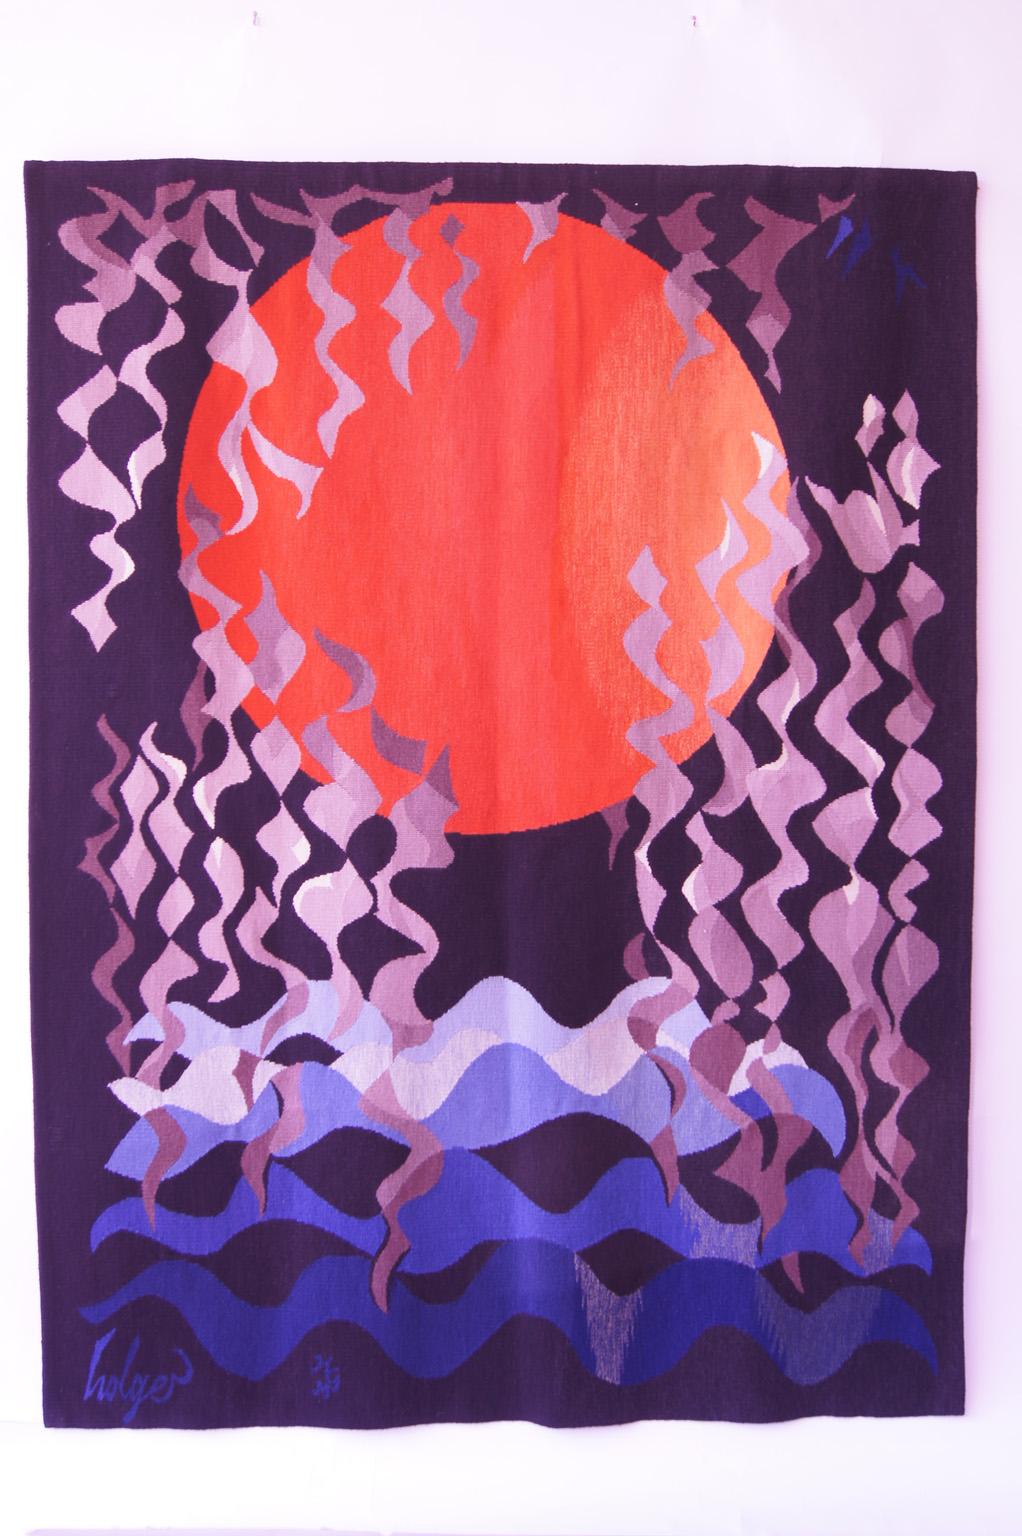 Wall carpet / tapestry by Dirk Holger for Münchner Gobelin Manufaktur, 1970s, Germany.
This blue /orange /purple colored Wall Hanging is signed on the reverse side and numbered L1257.
 